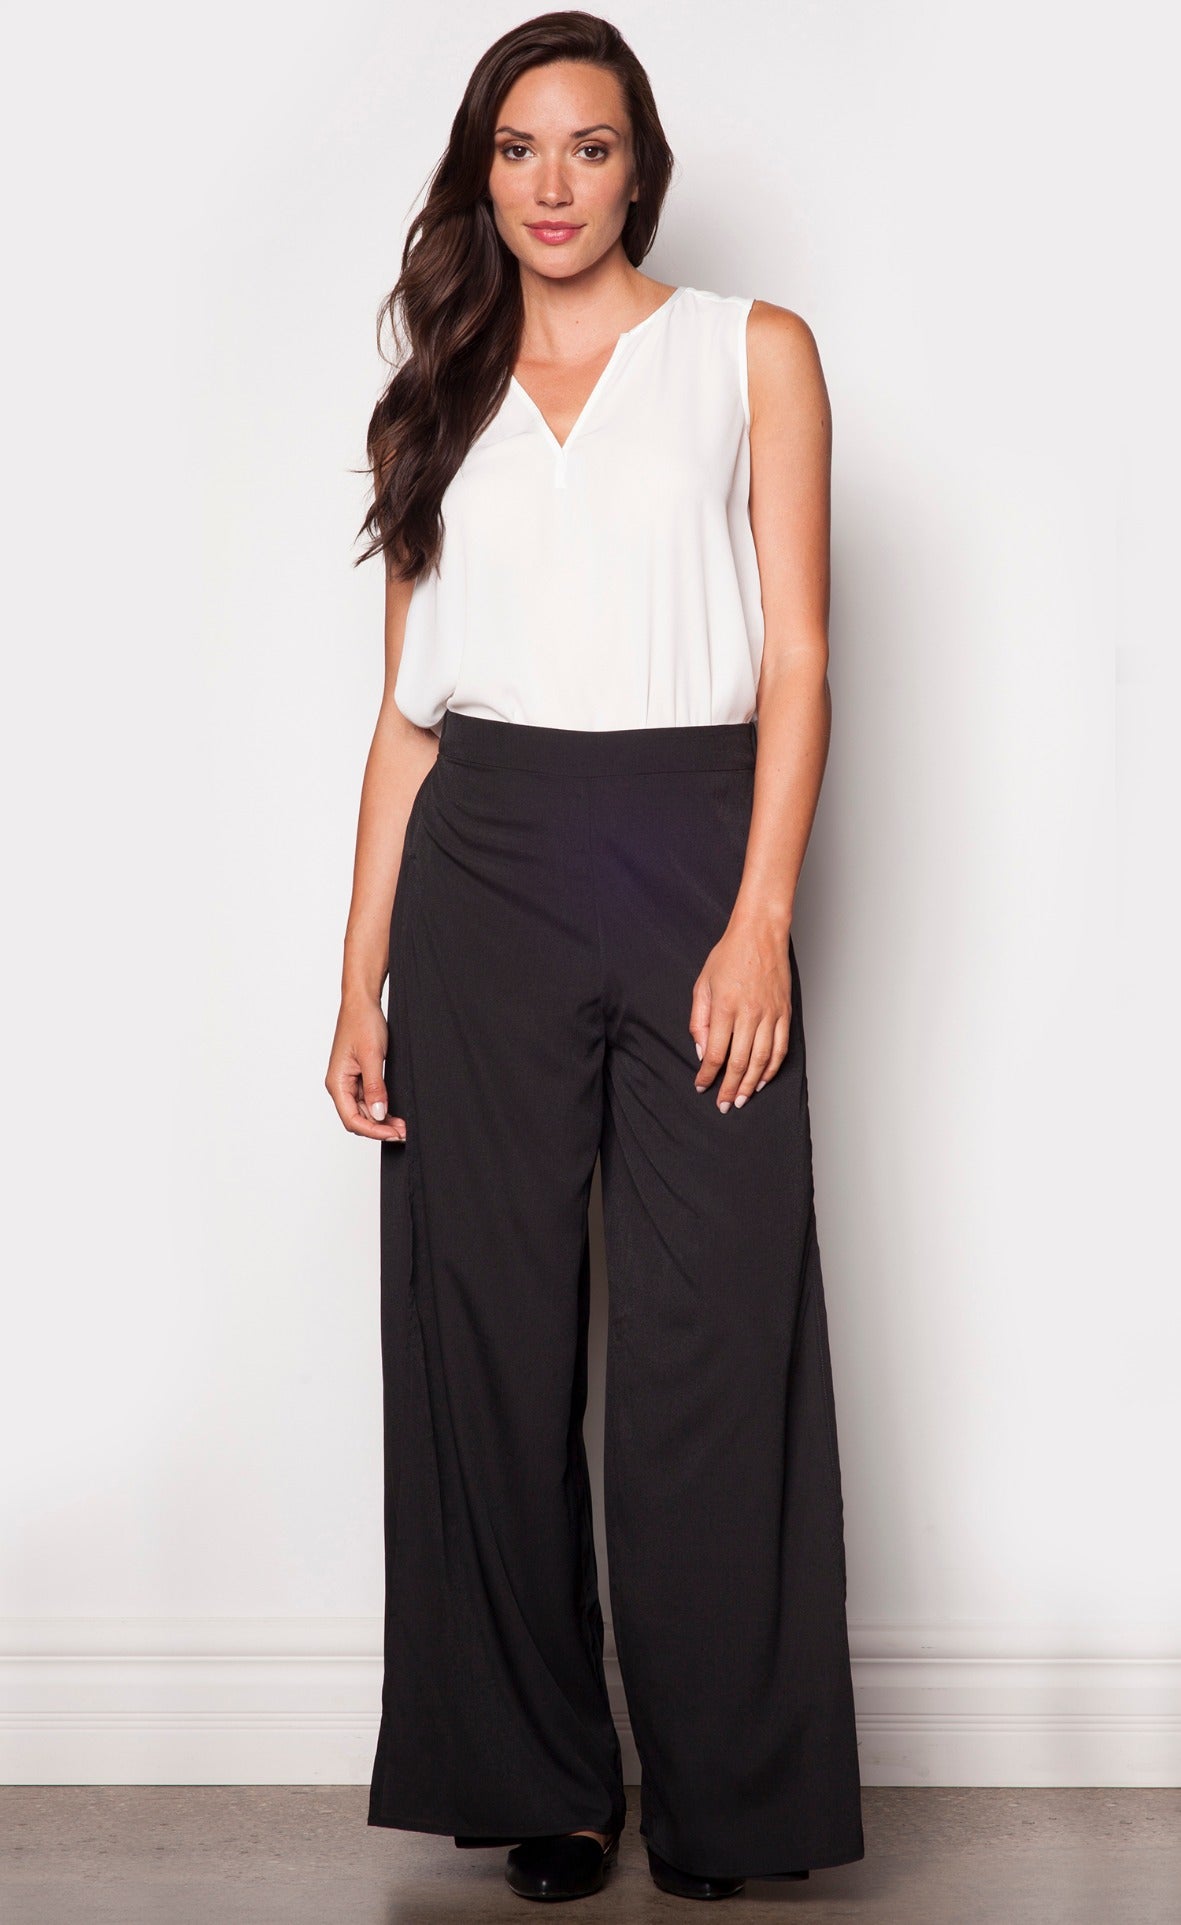 Boss Lady Pants - Pink Martini Collection